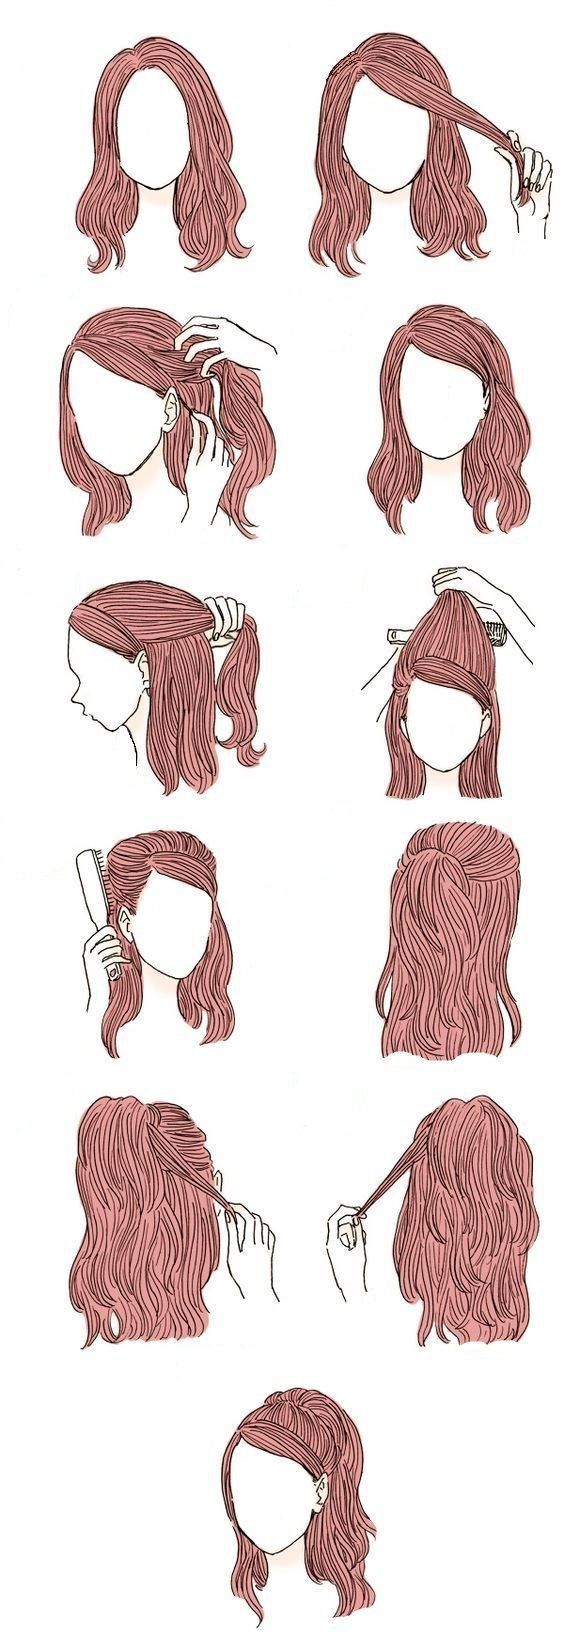 Hairstyle for the school